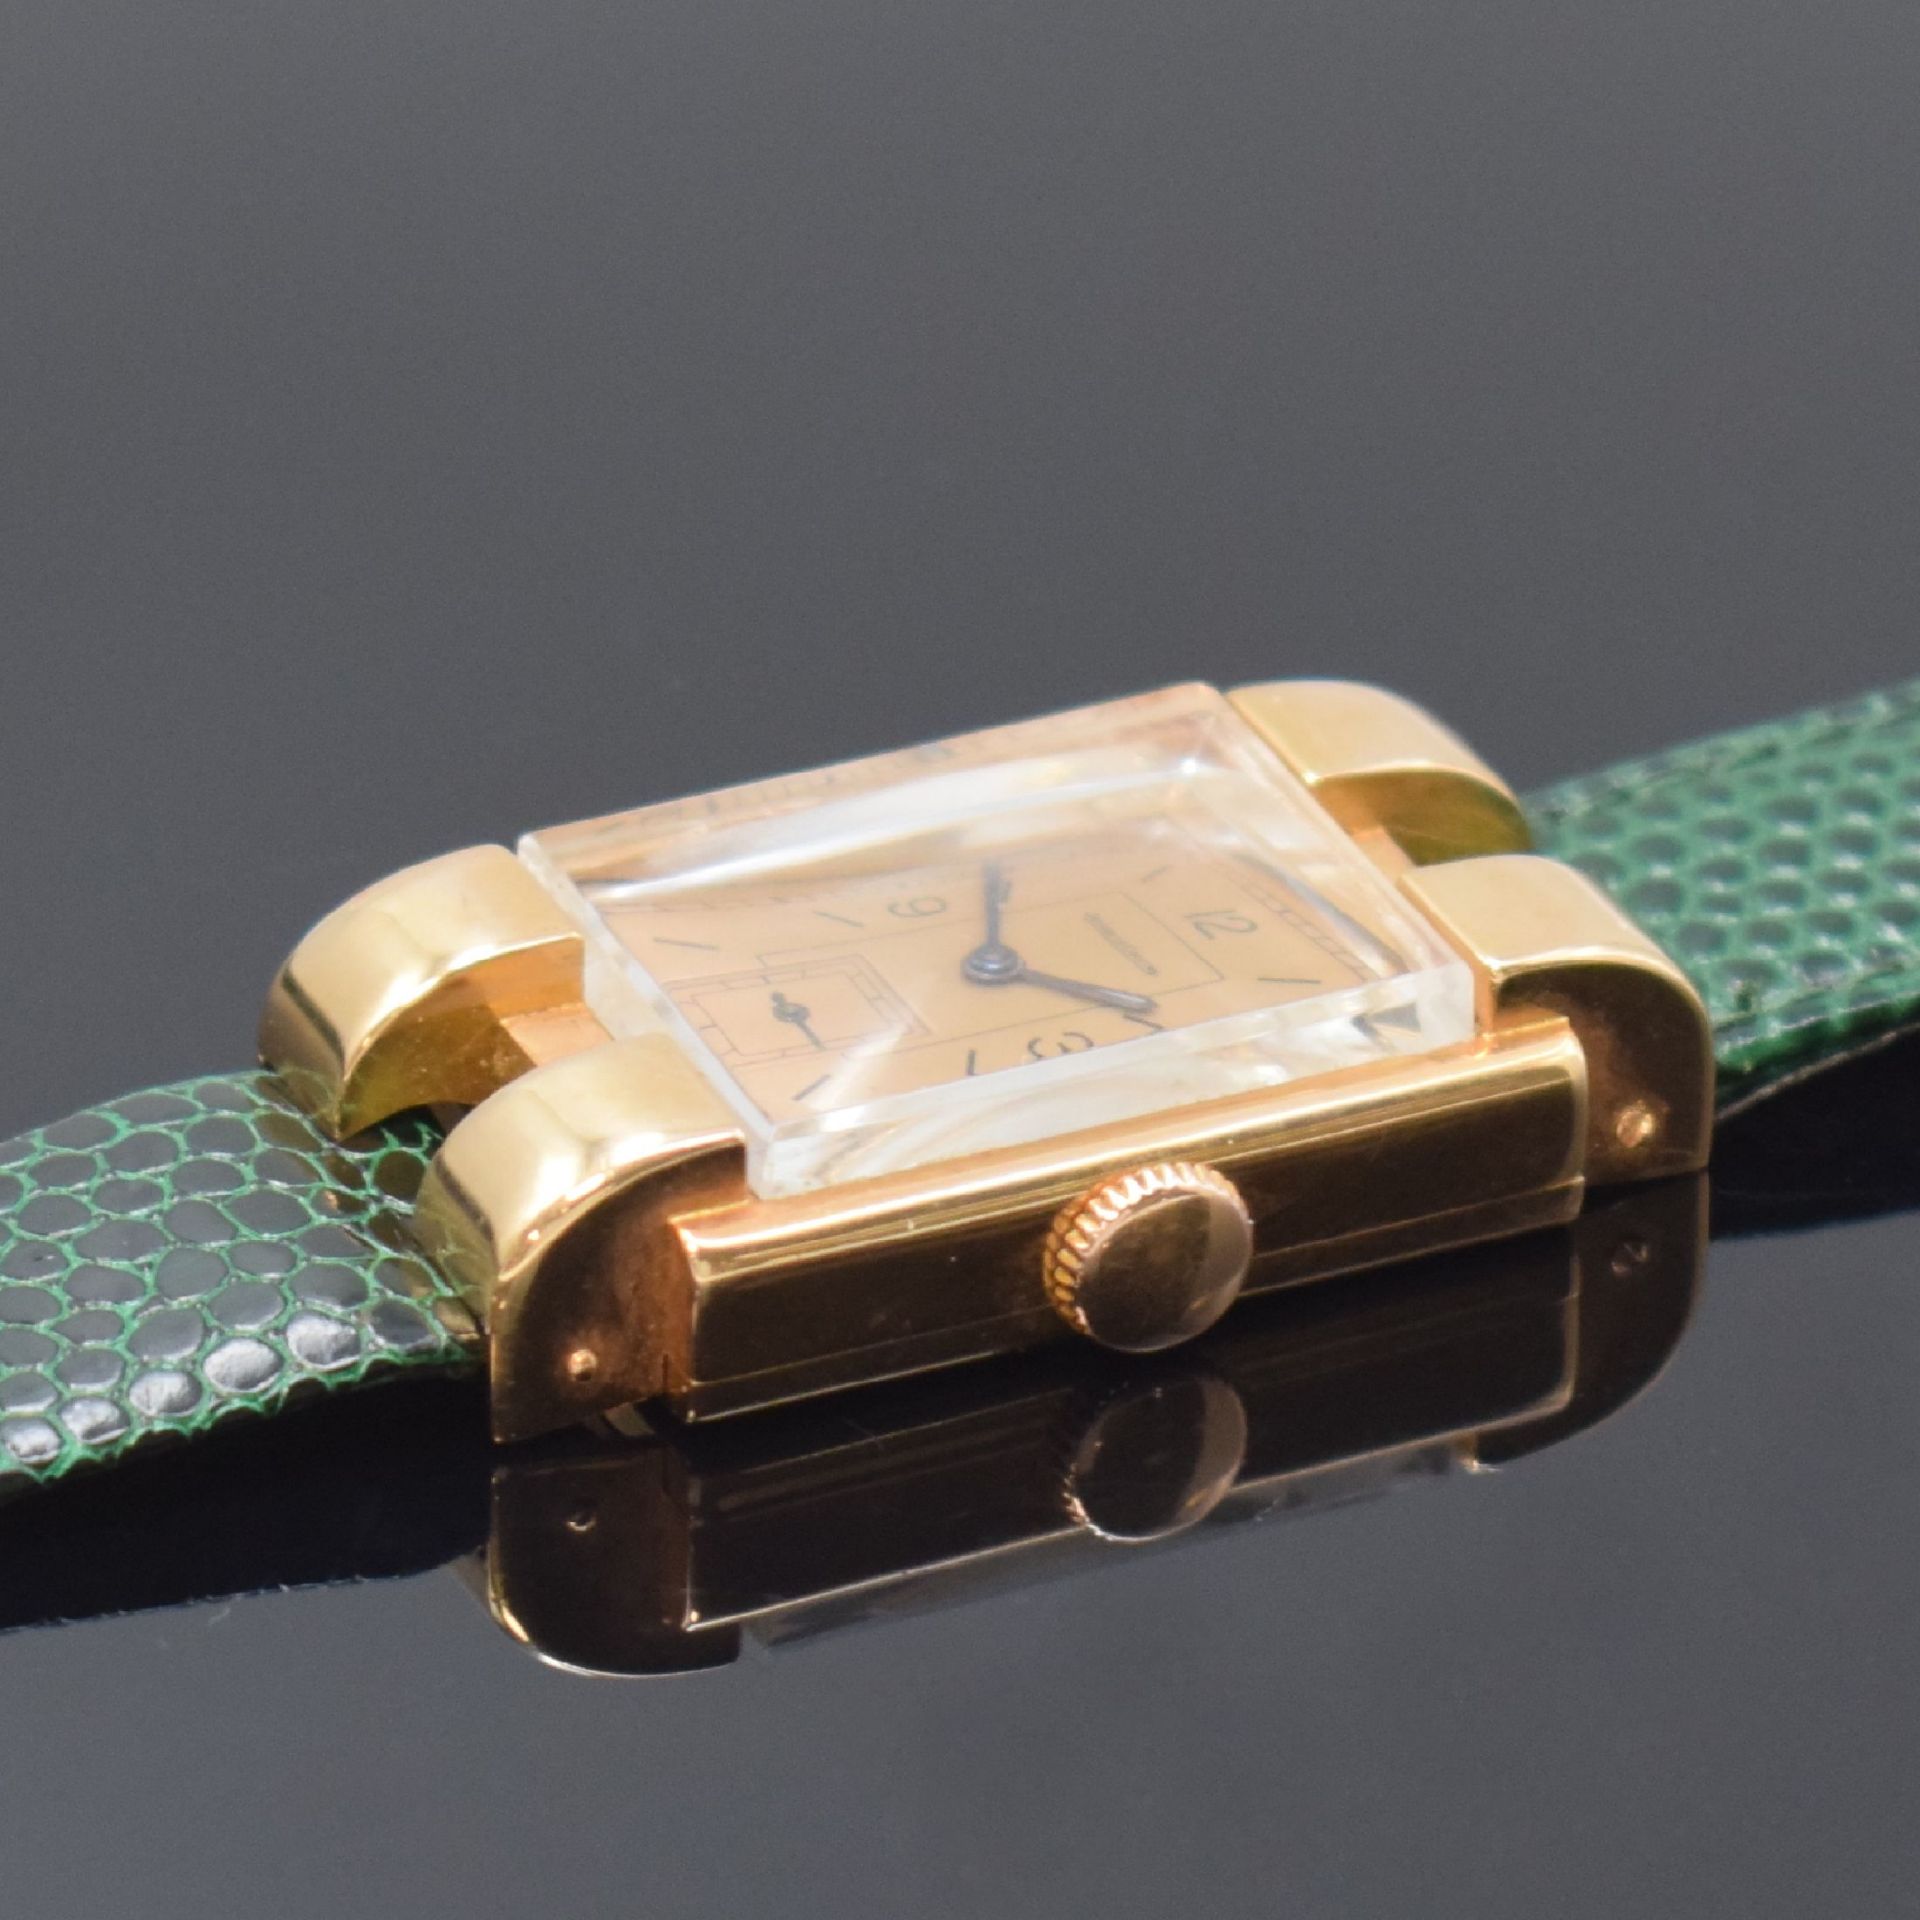 Jaeger-LeCoultre rechteckige Armbanduhr in Rotgold - Image 3 of 5